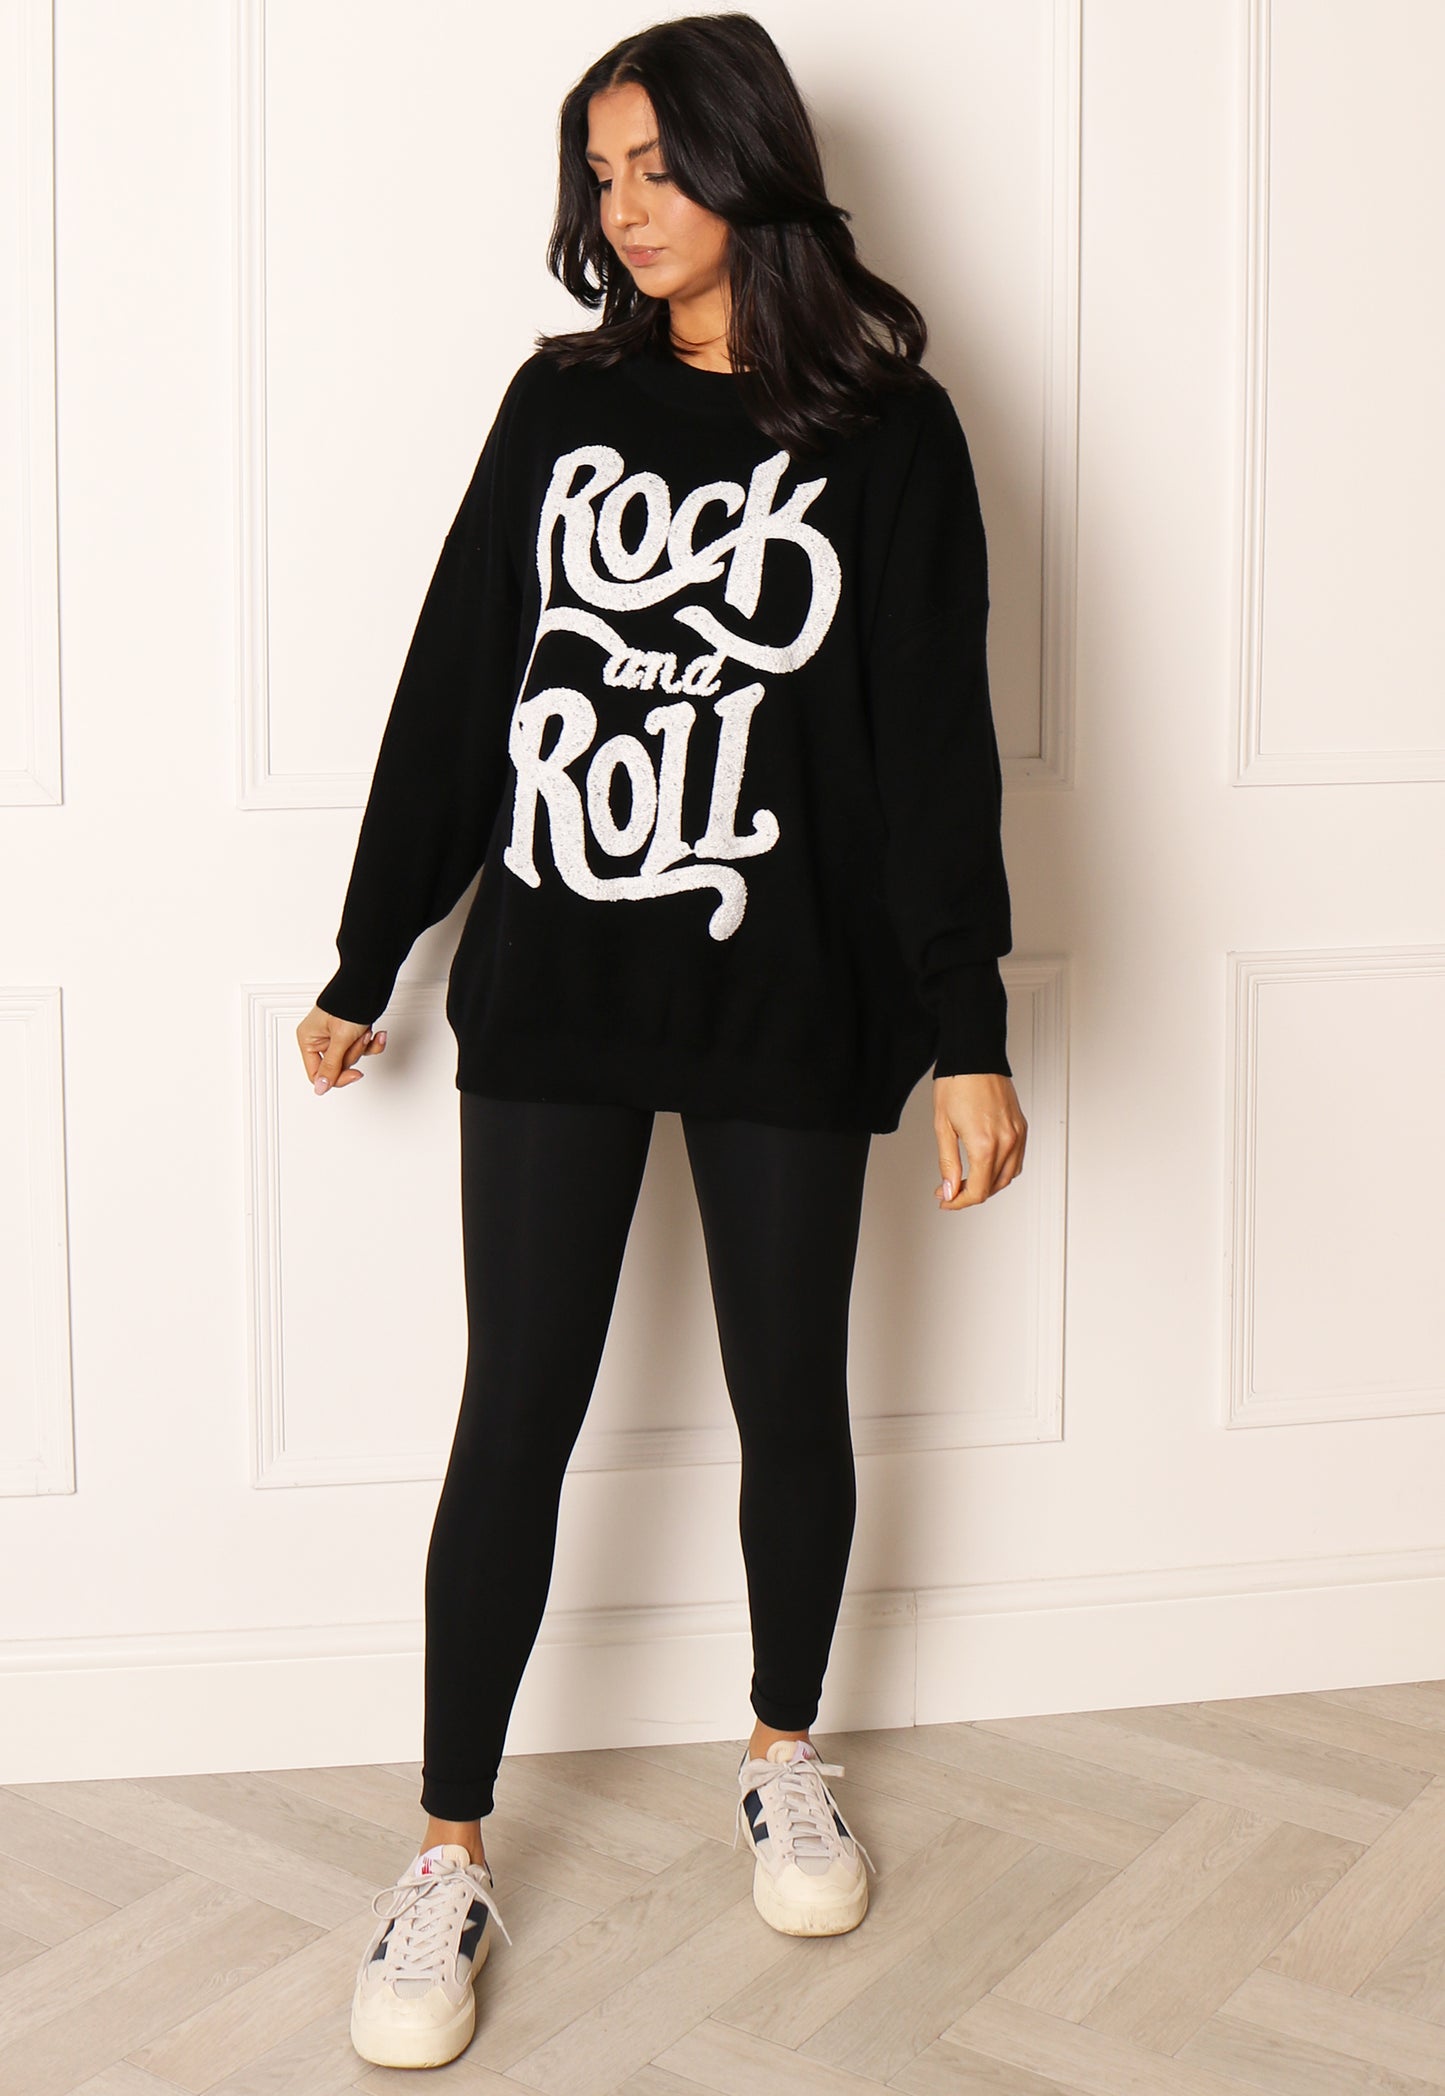 Wavy Rock and Roll Slogan Oversized Soft Knit Jumper in Black & White - concretebartops